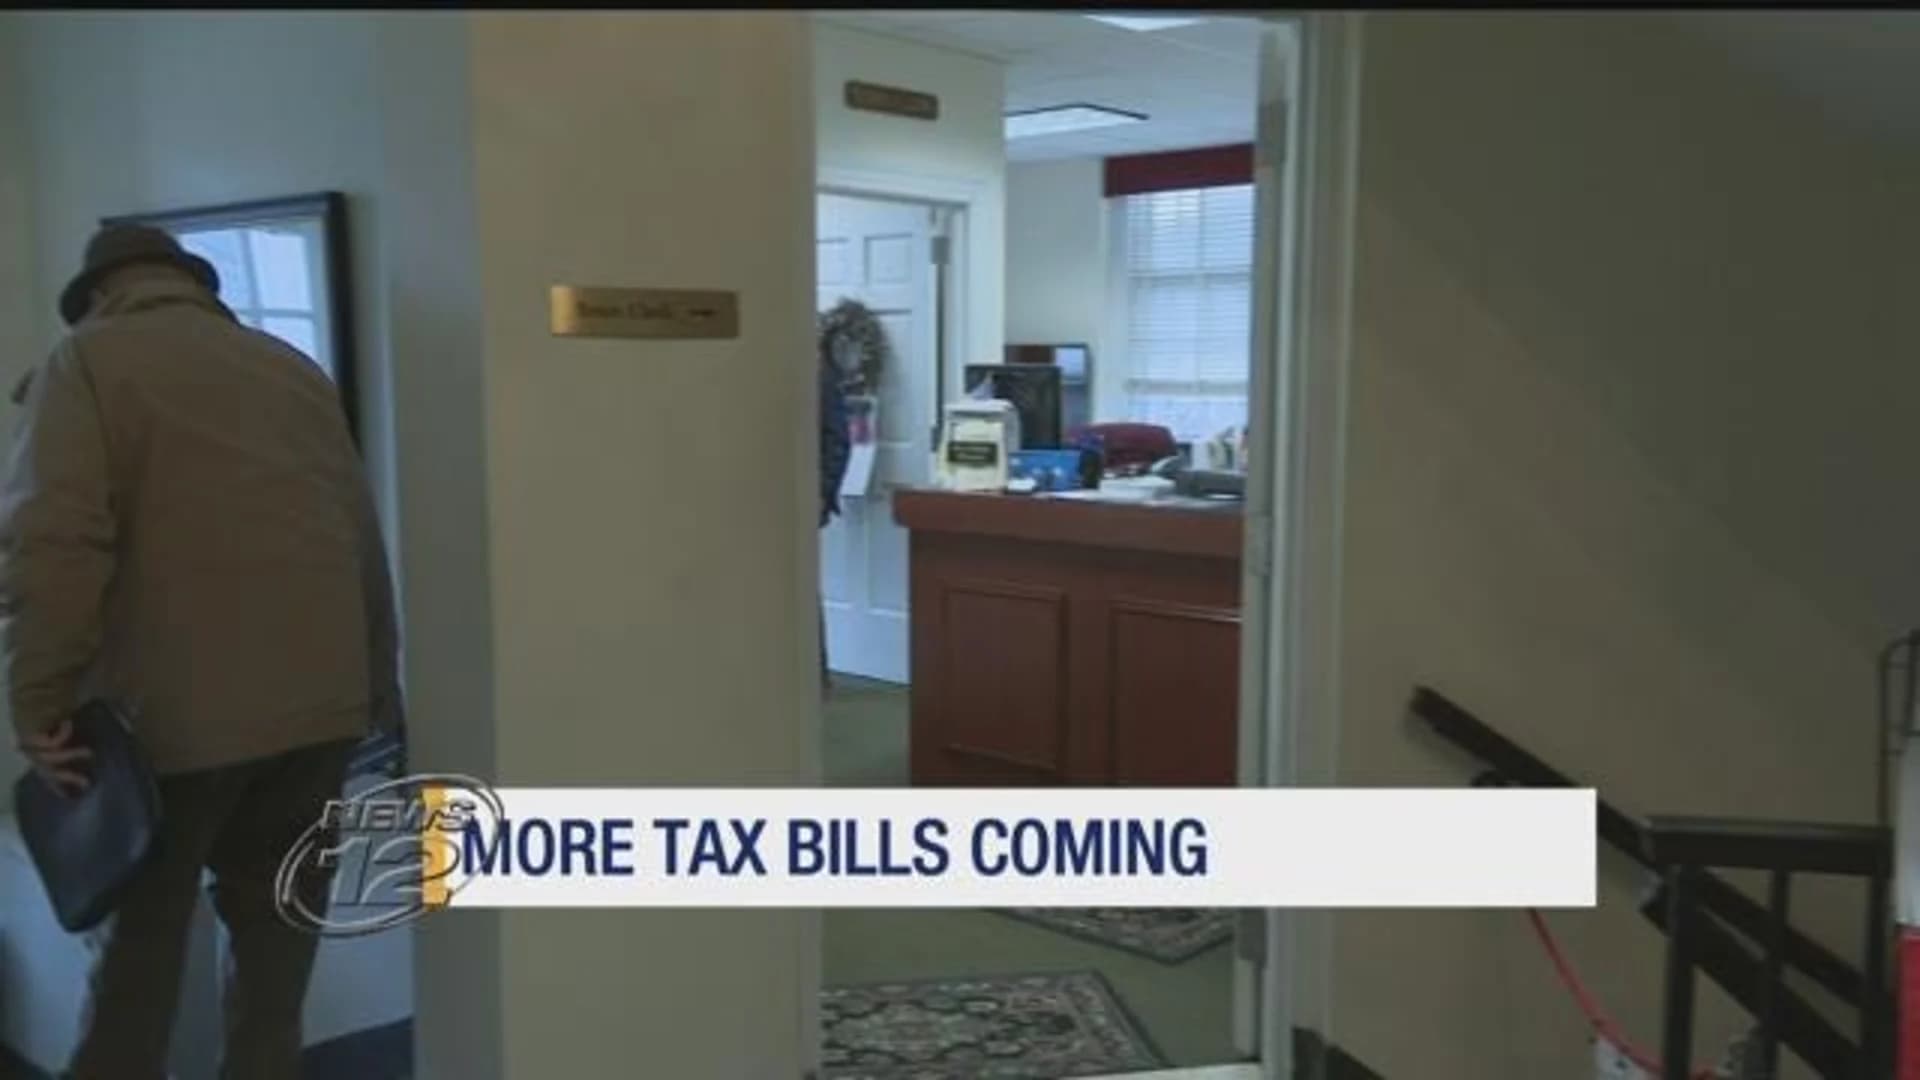 Officials: Homeowners who prepaid taxes should expect another bill